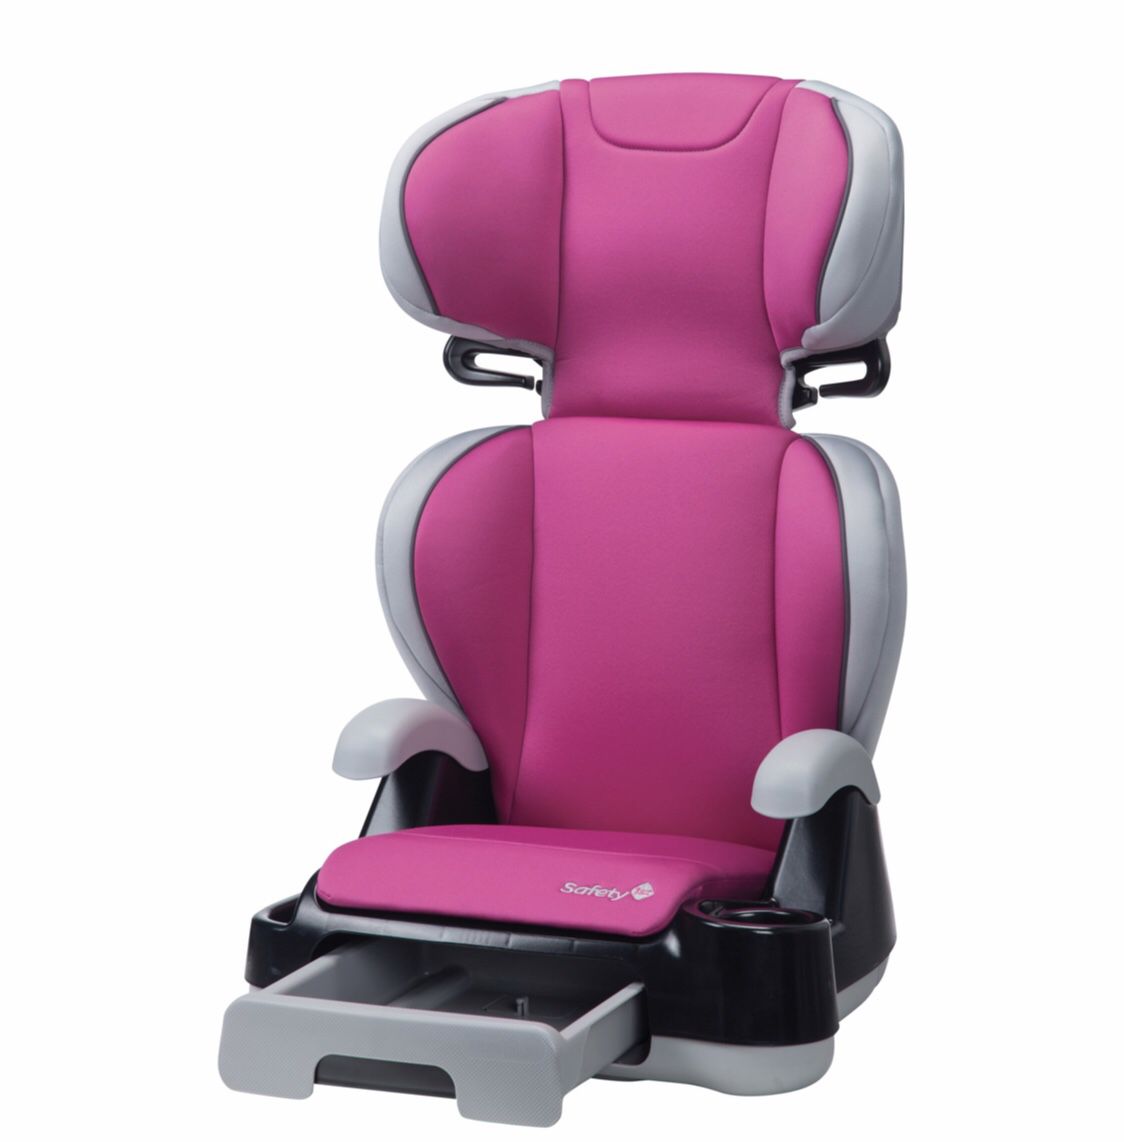 Safety 1st booster car seat for toddler/kids